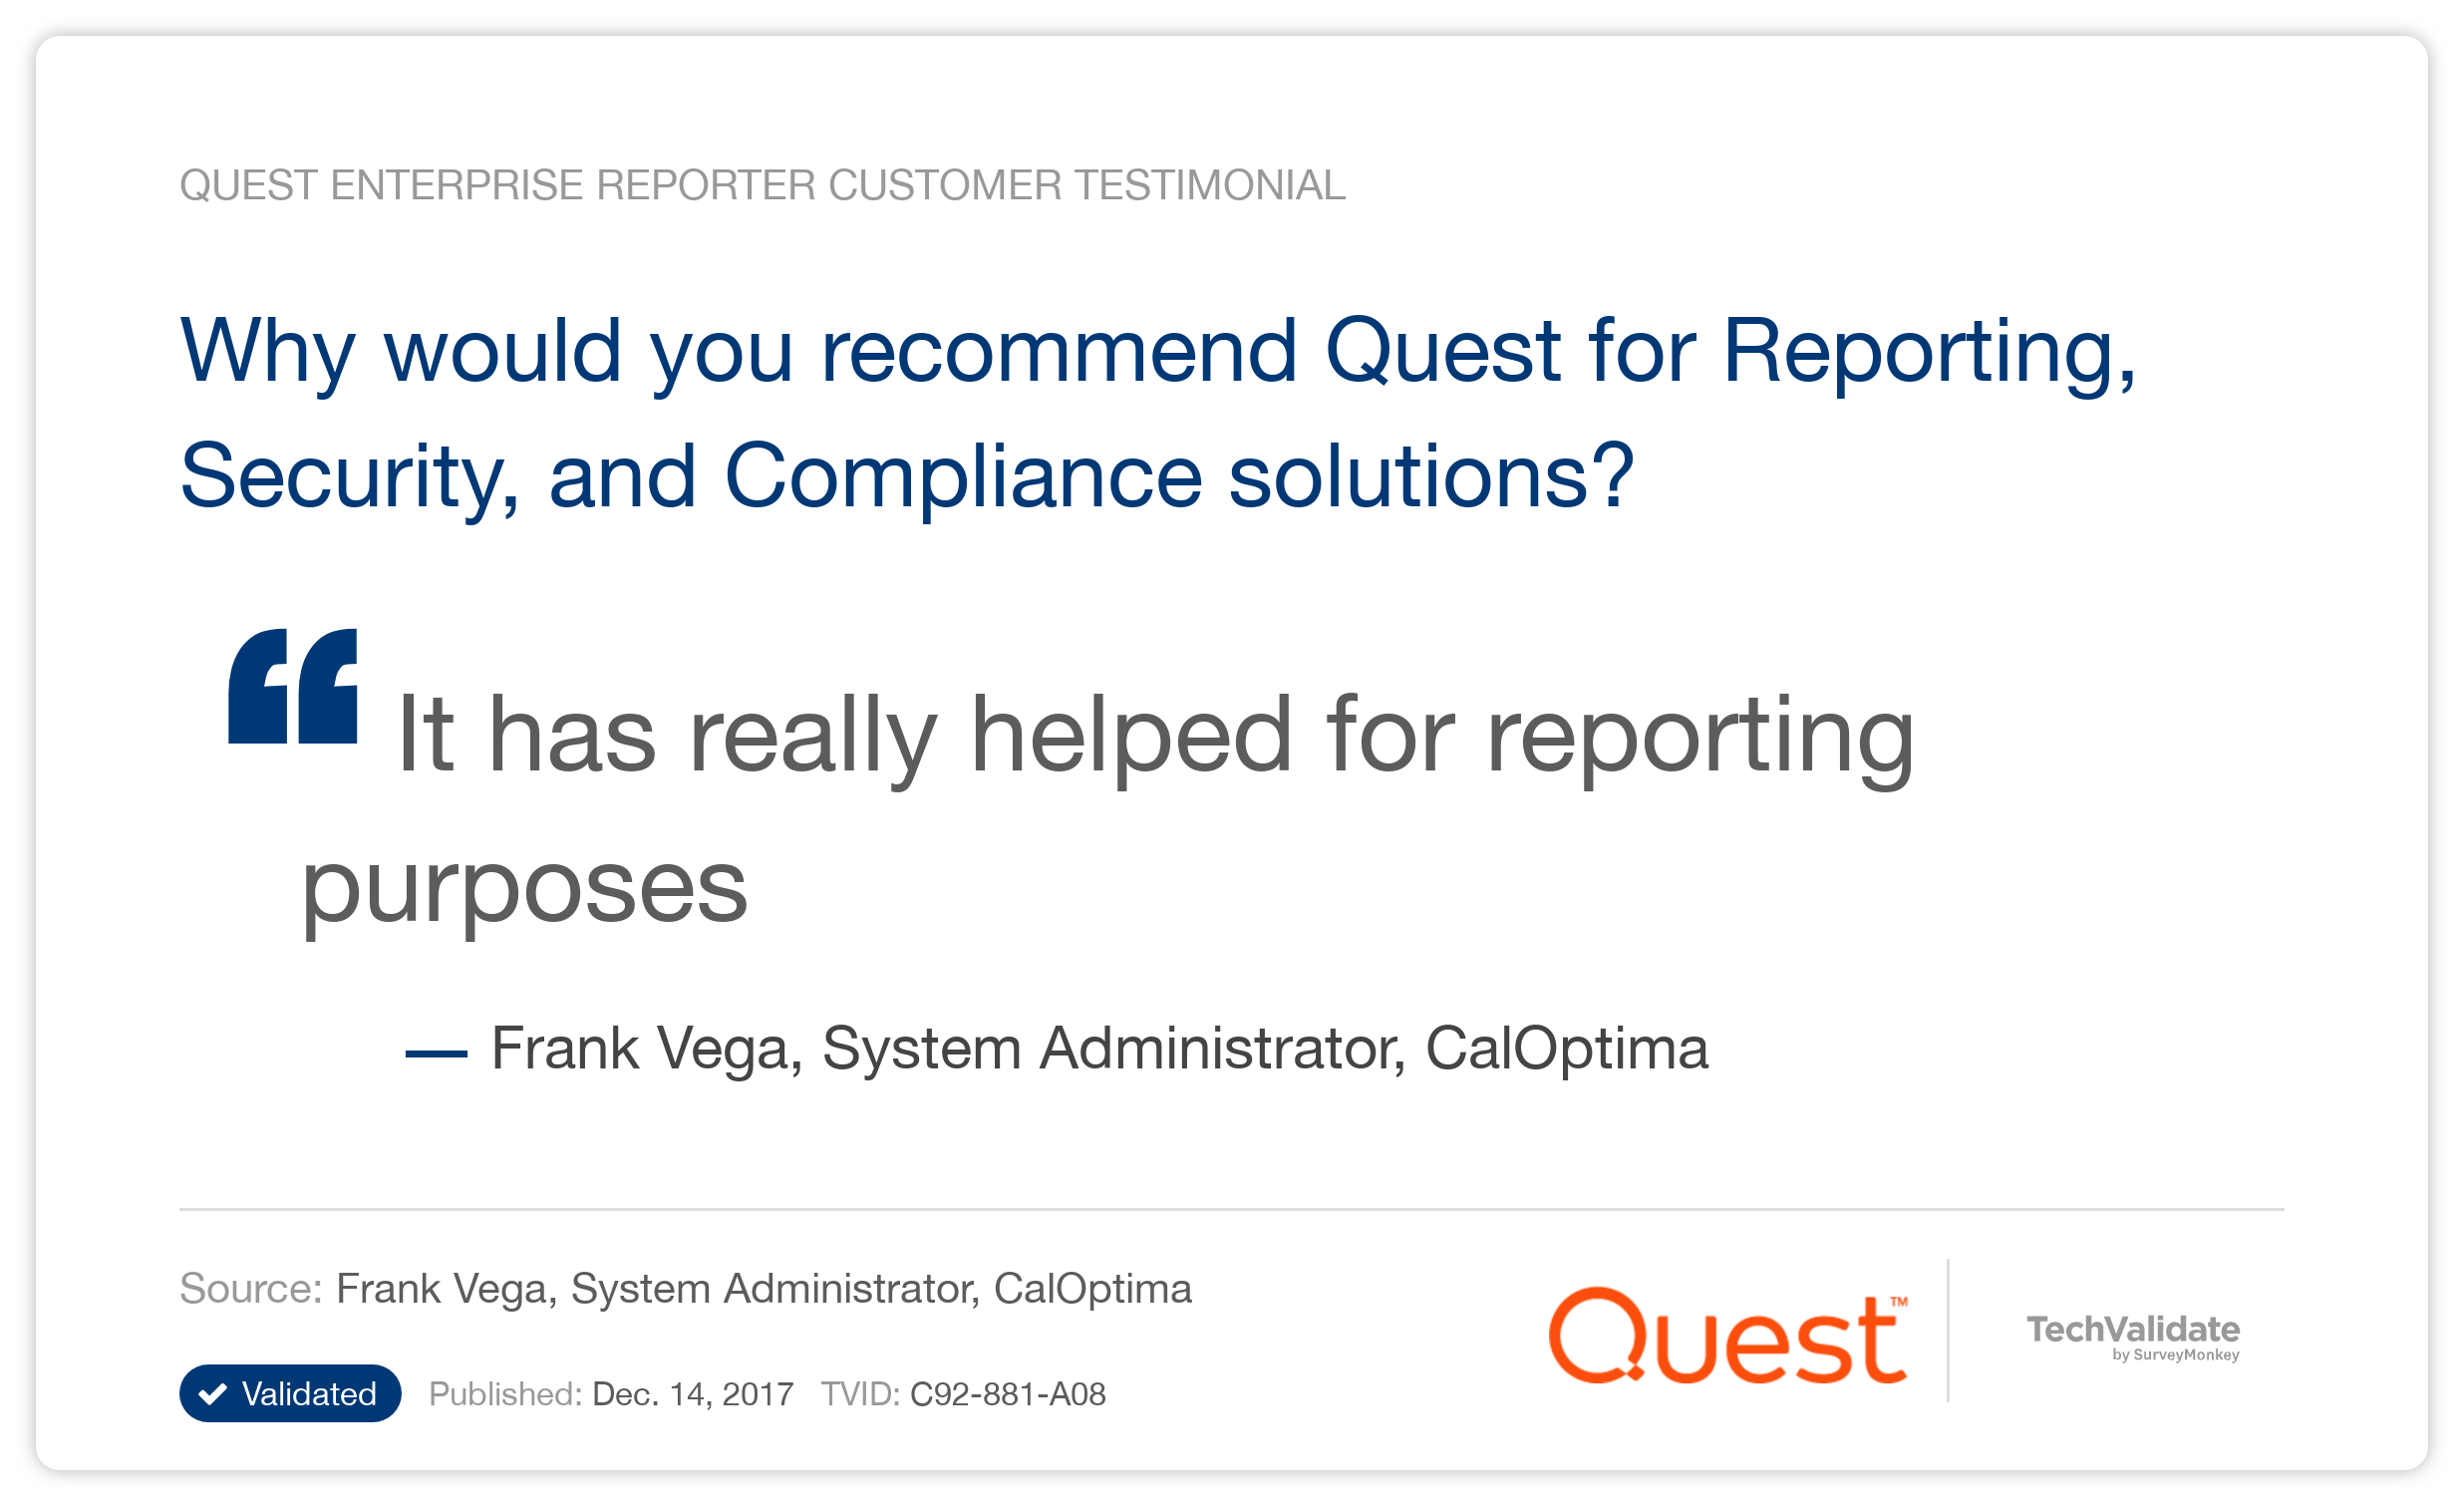 Why would you recommend Quest for Reporting, Security, and Compliance solutions?